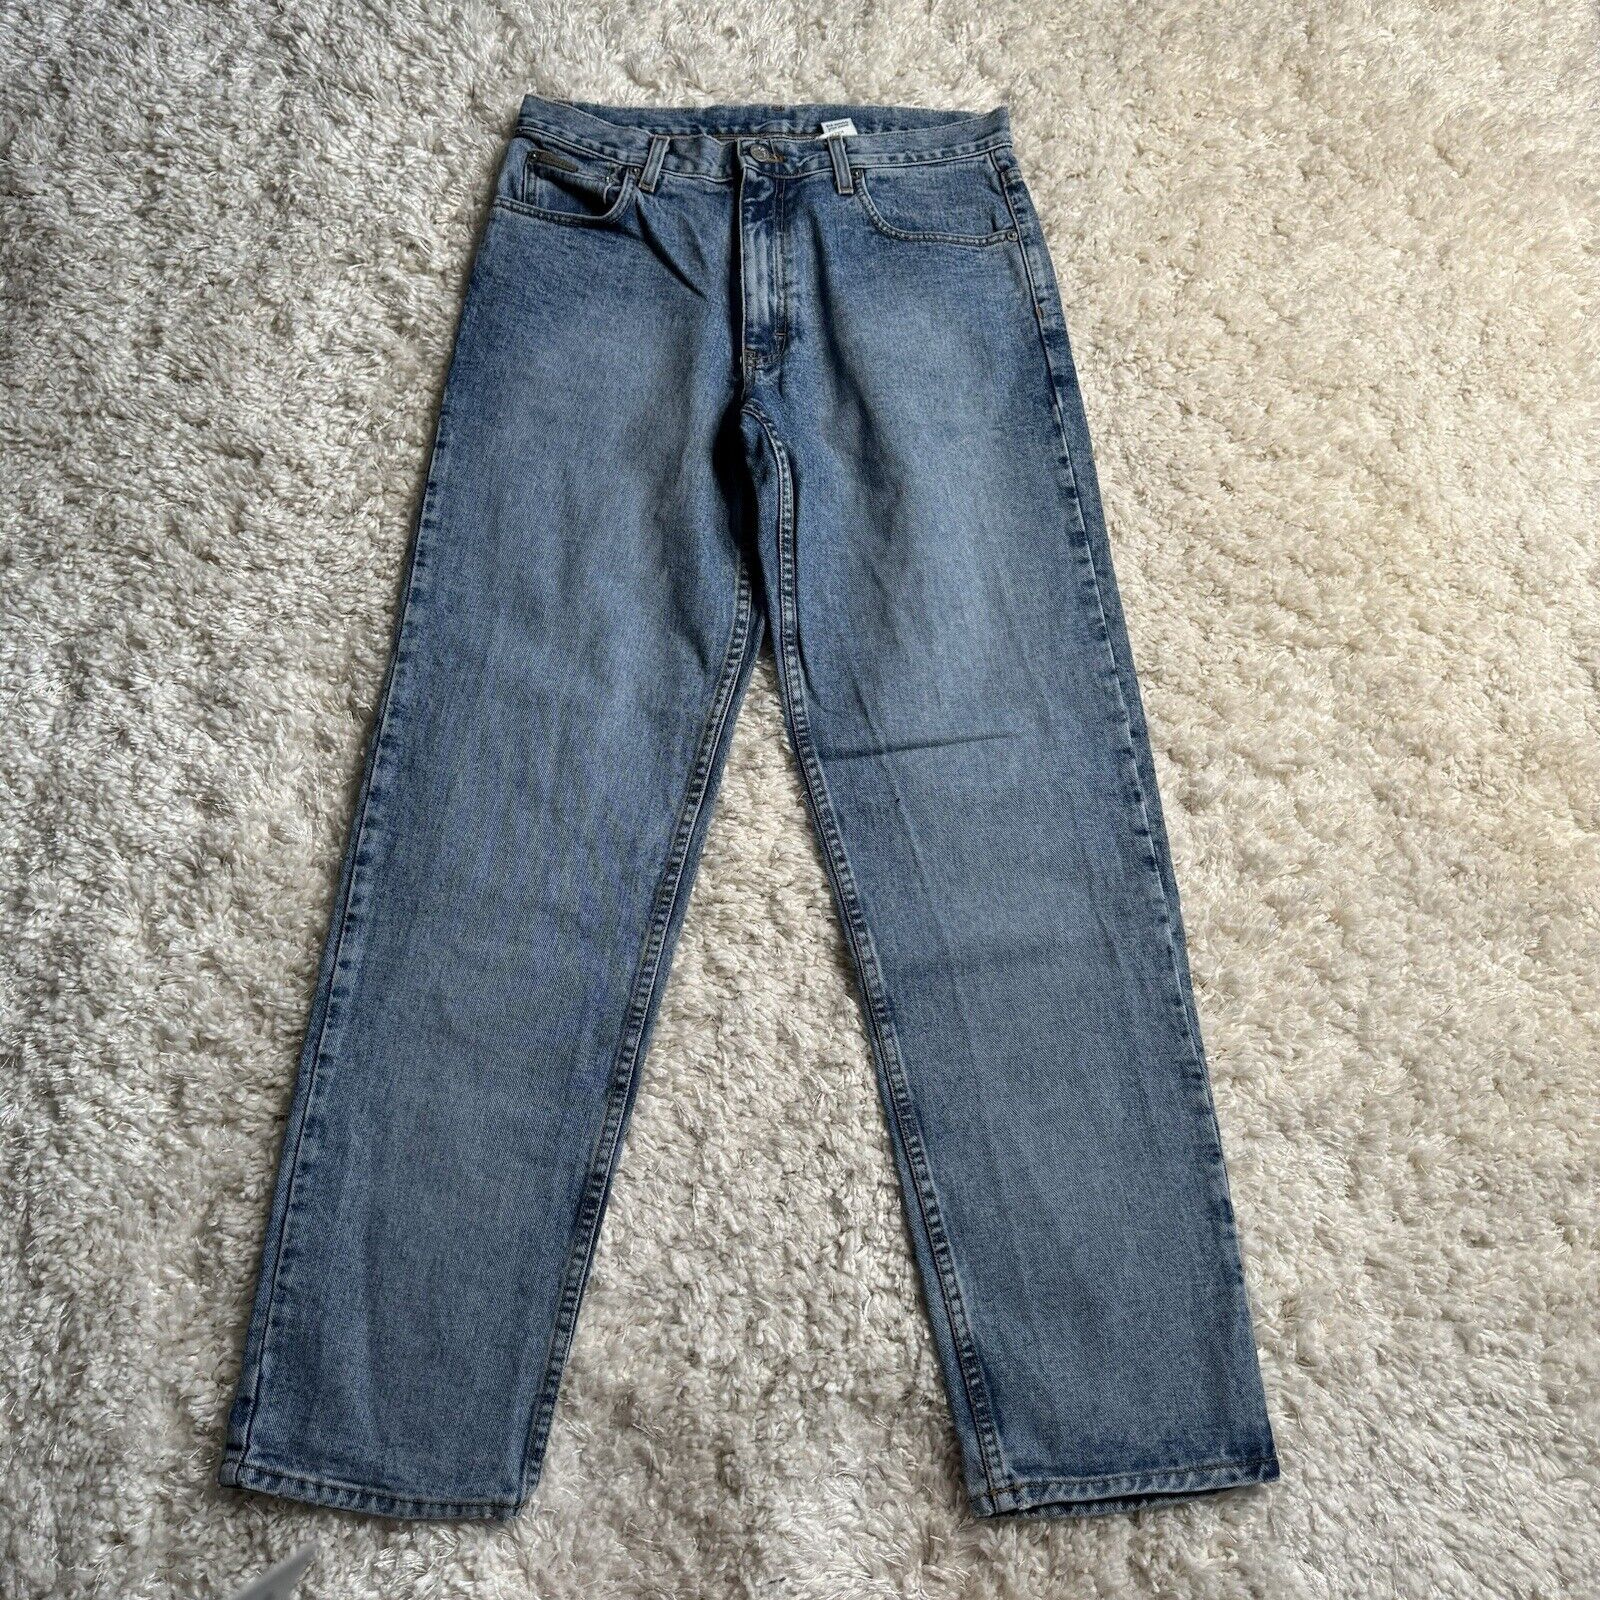 Vintage Calvin Klein Jeans Mens 32x32 Blue Solid Light Wash Straight Made in USA